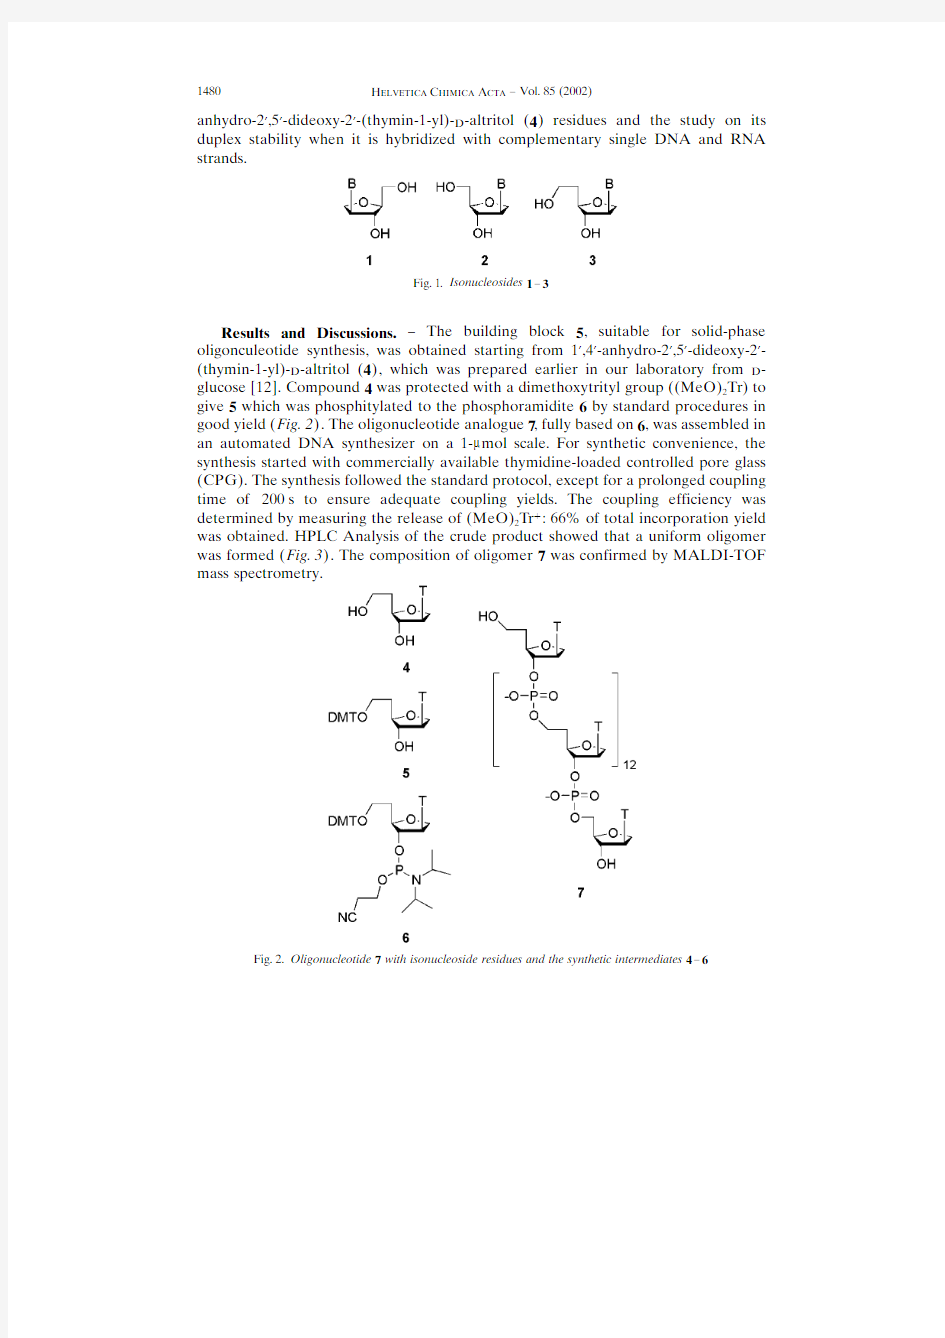 Synthesis and Hybridization Properties of an Oligonucleotide Consisting of 1